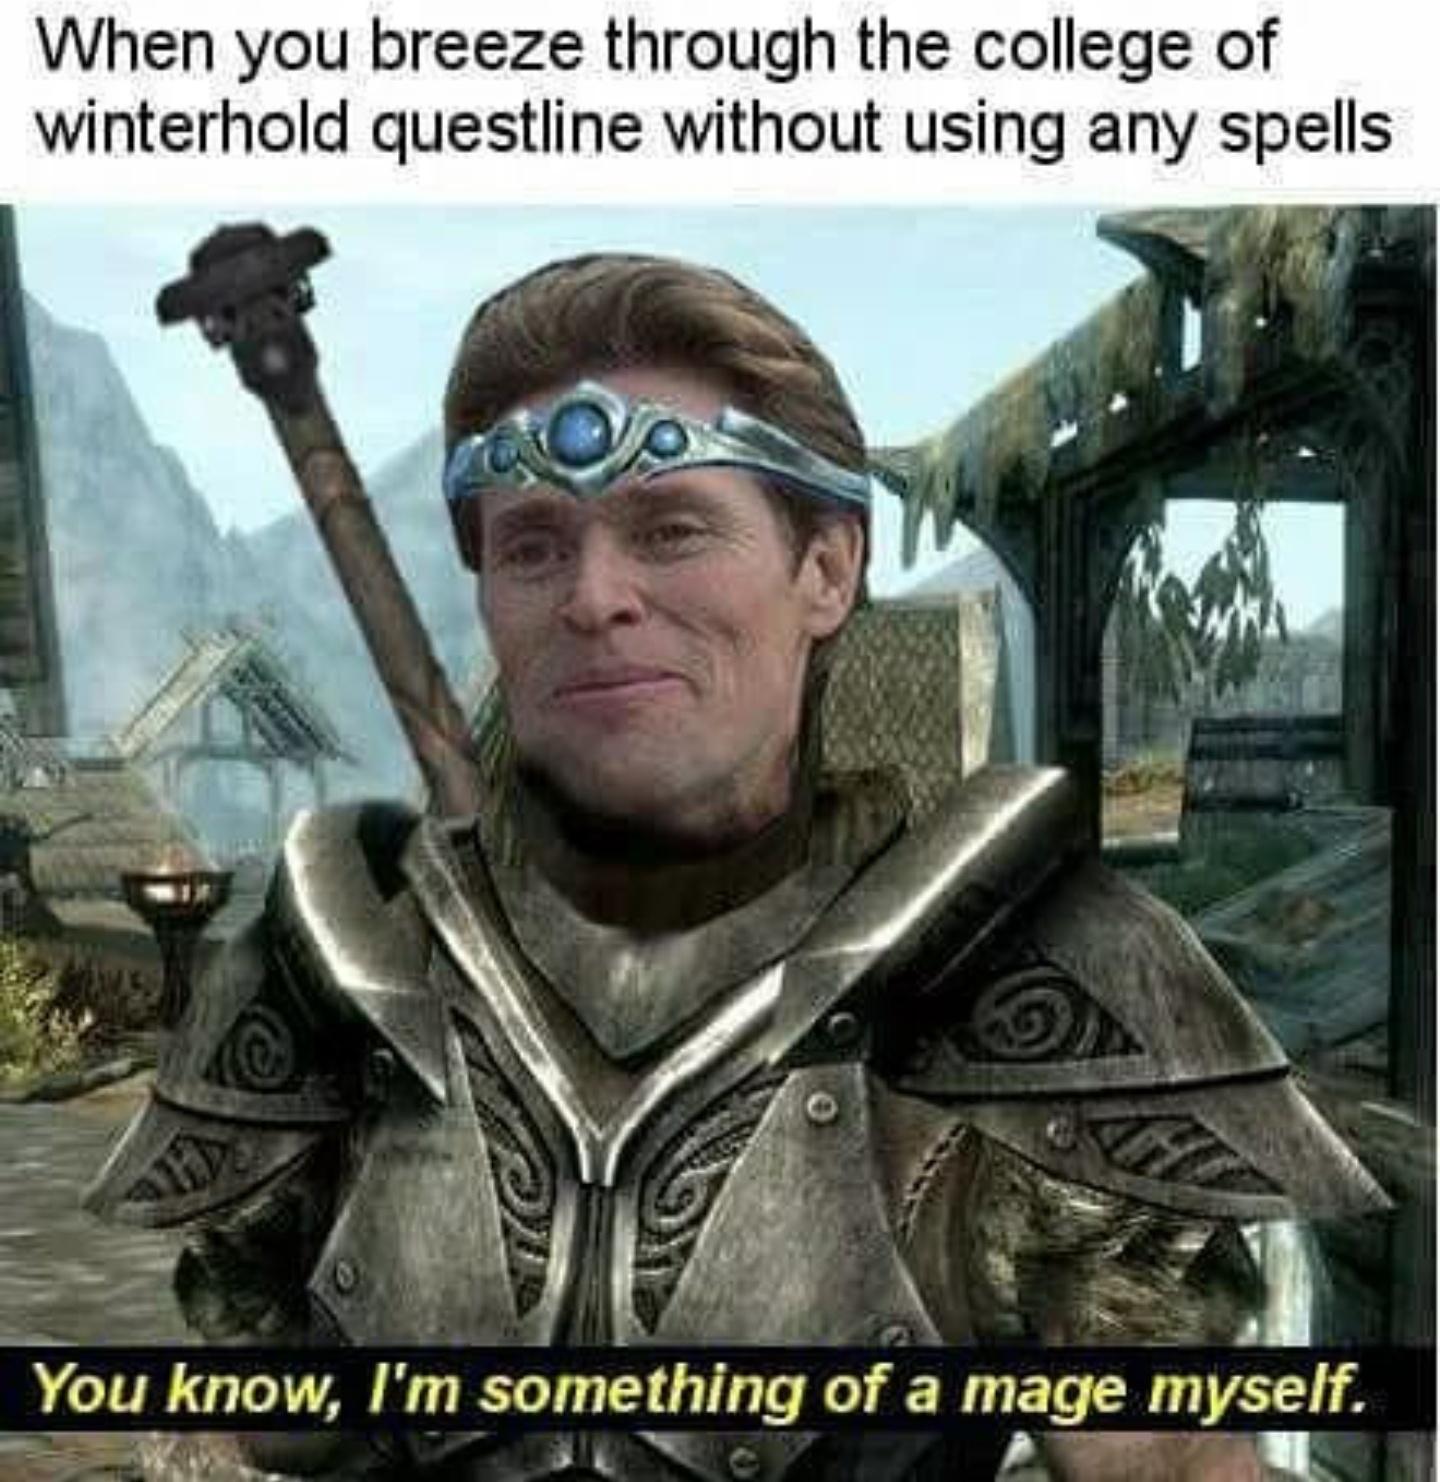 funny gaming memes - skyrim meme - When you breeze through the college of winterhold questline without using any spells You know, I'm something of a mage myself.